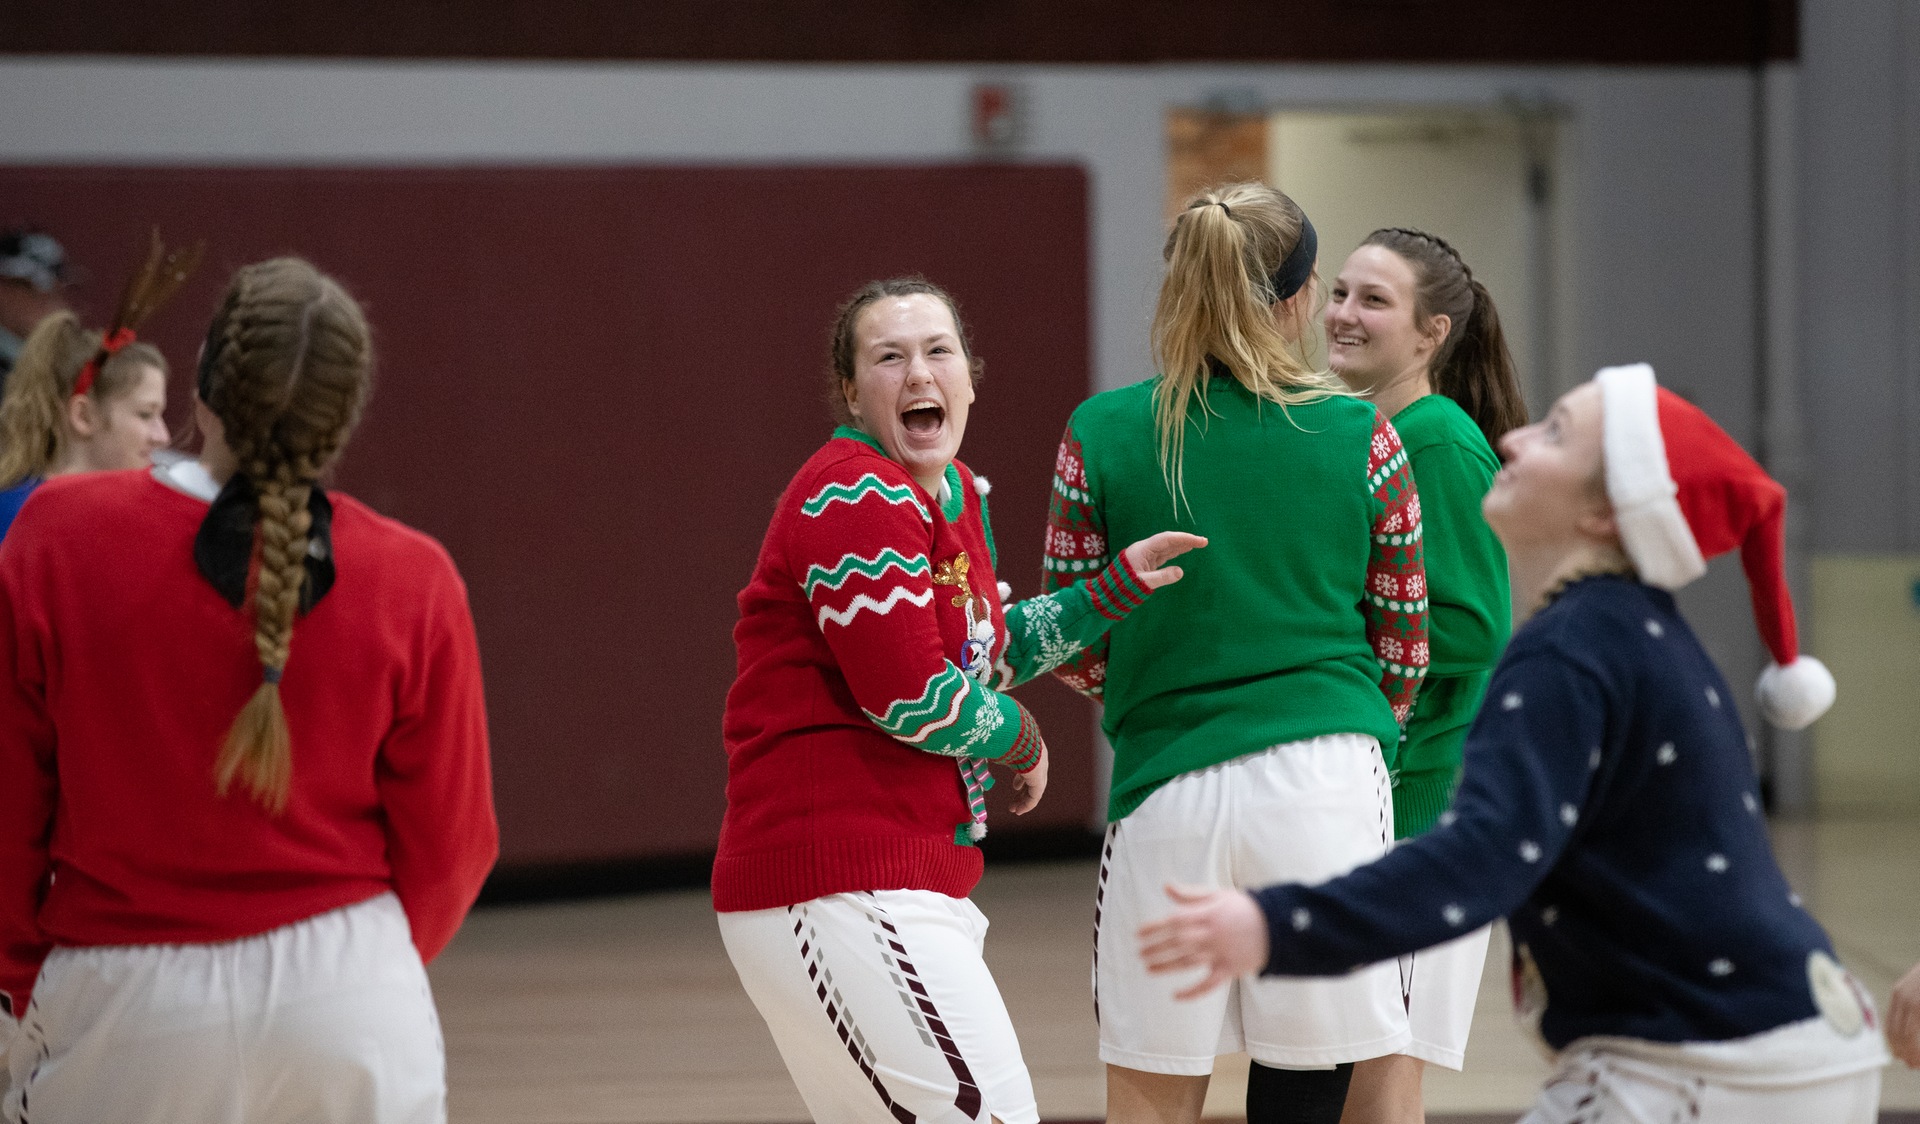 Faith Puts on a Show at Annual Christmas Classic